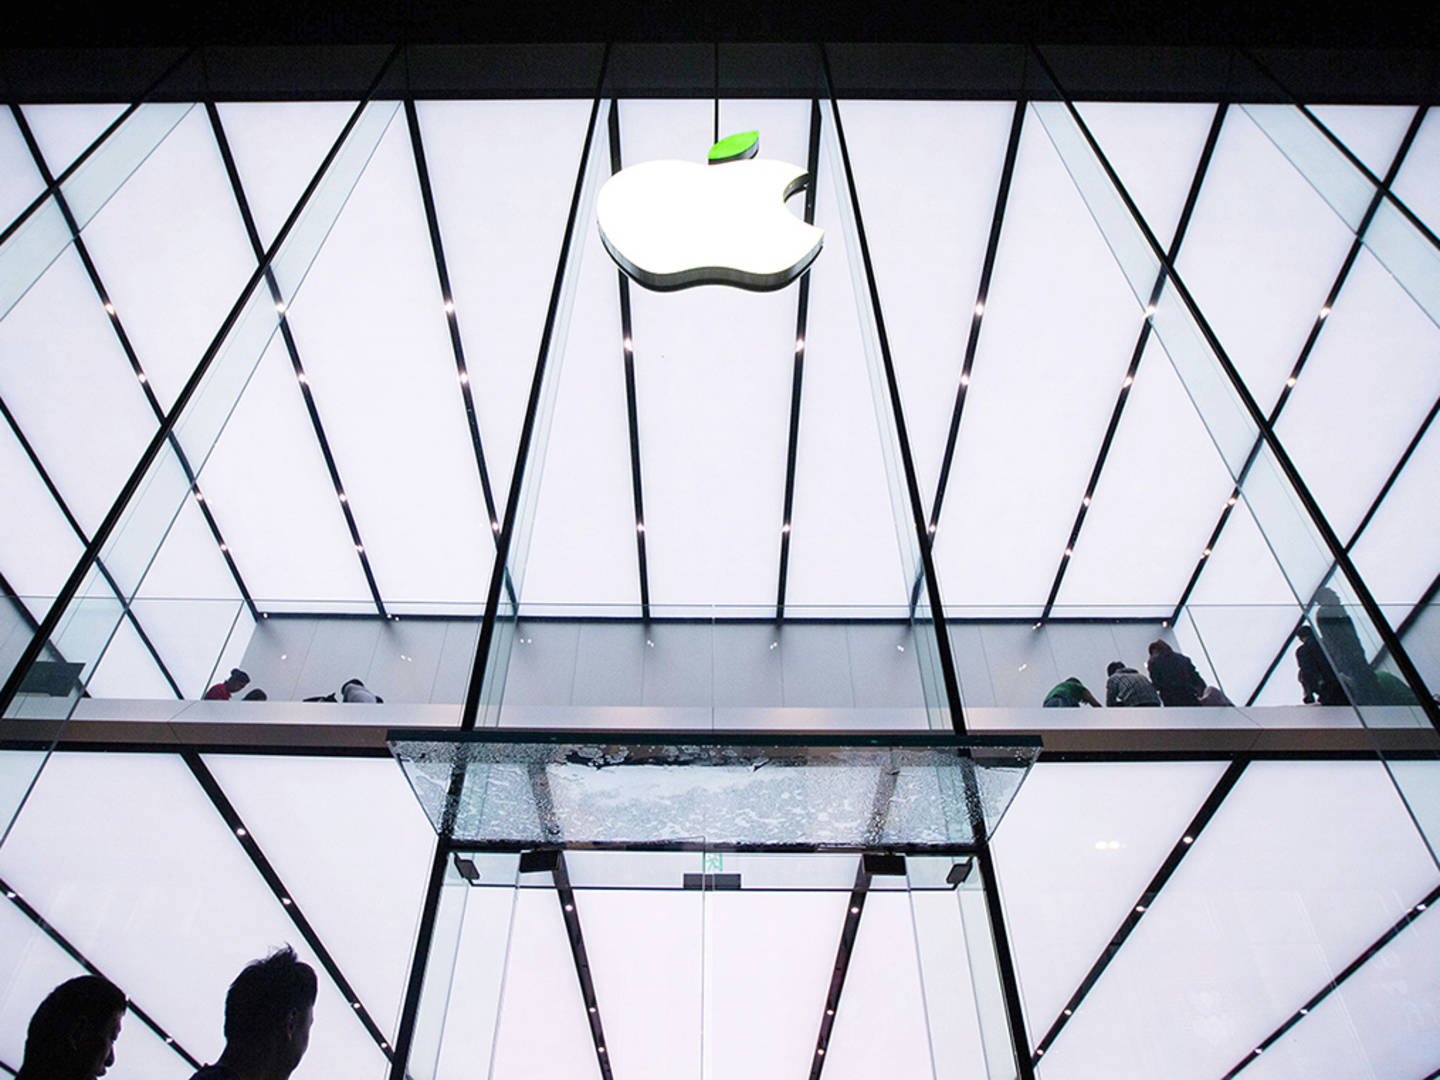 Hackers are finding ways to hide inside Apple’s walled garden